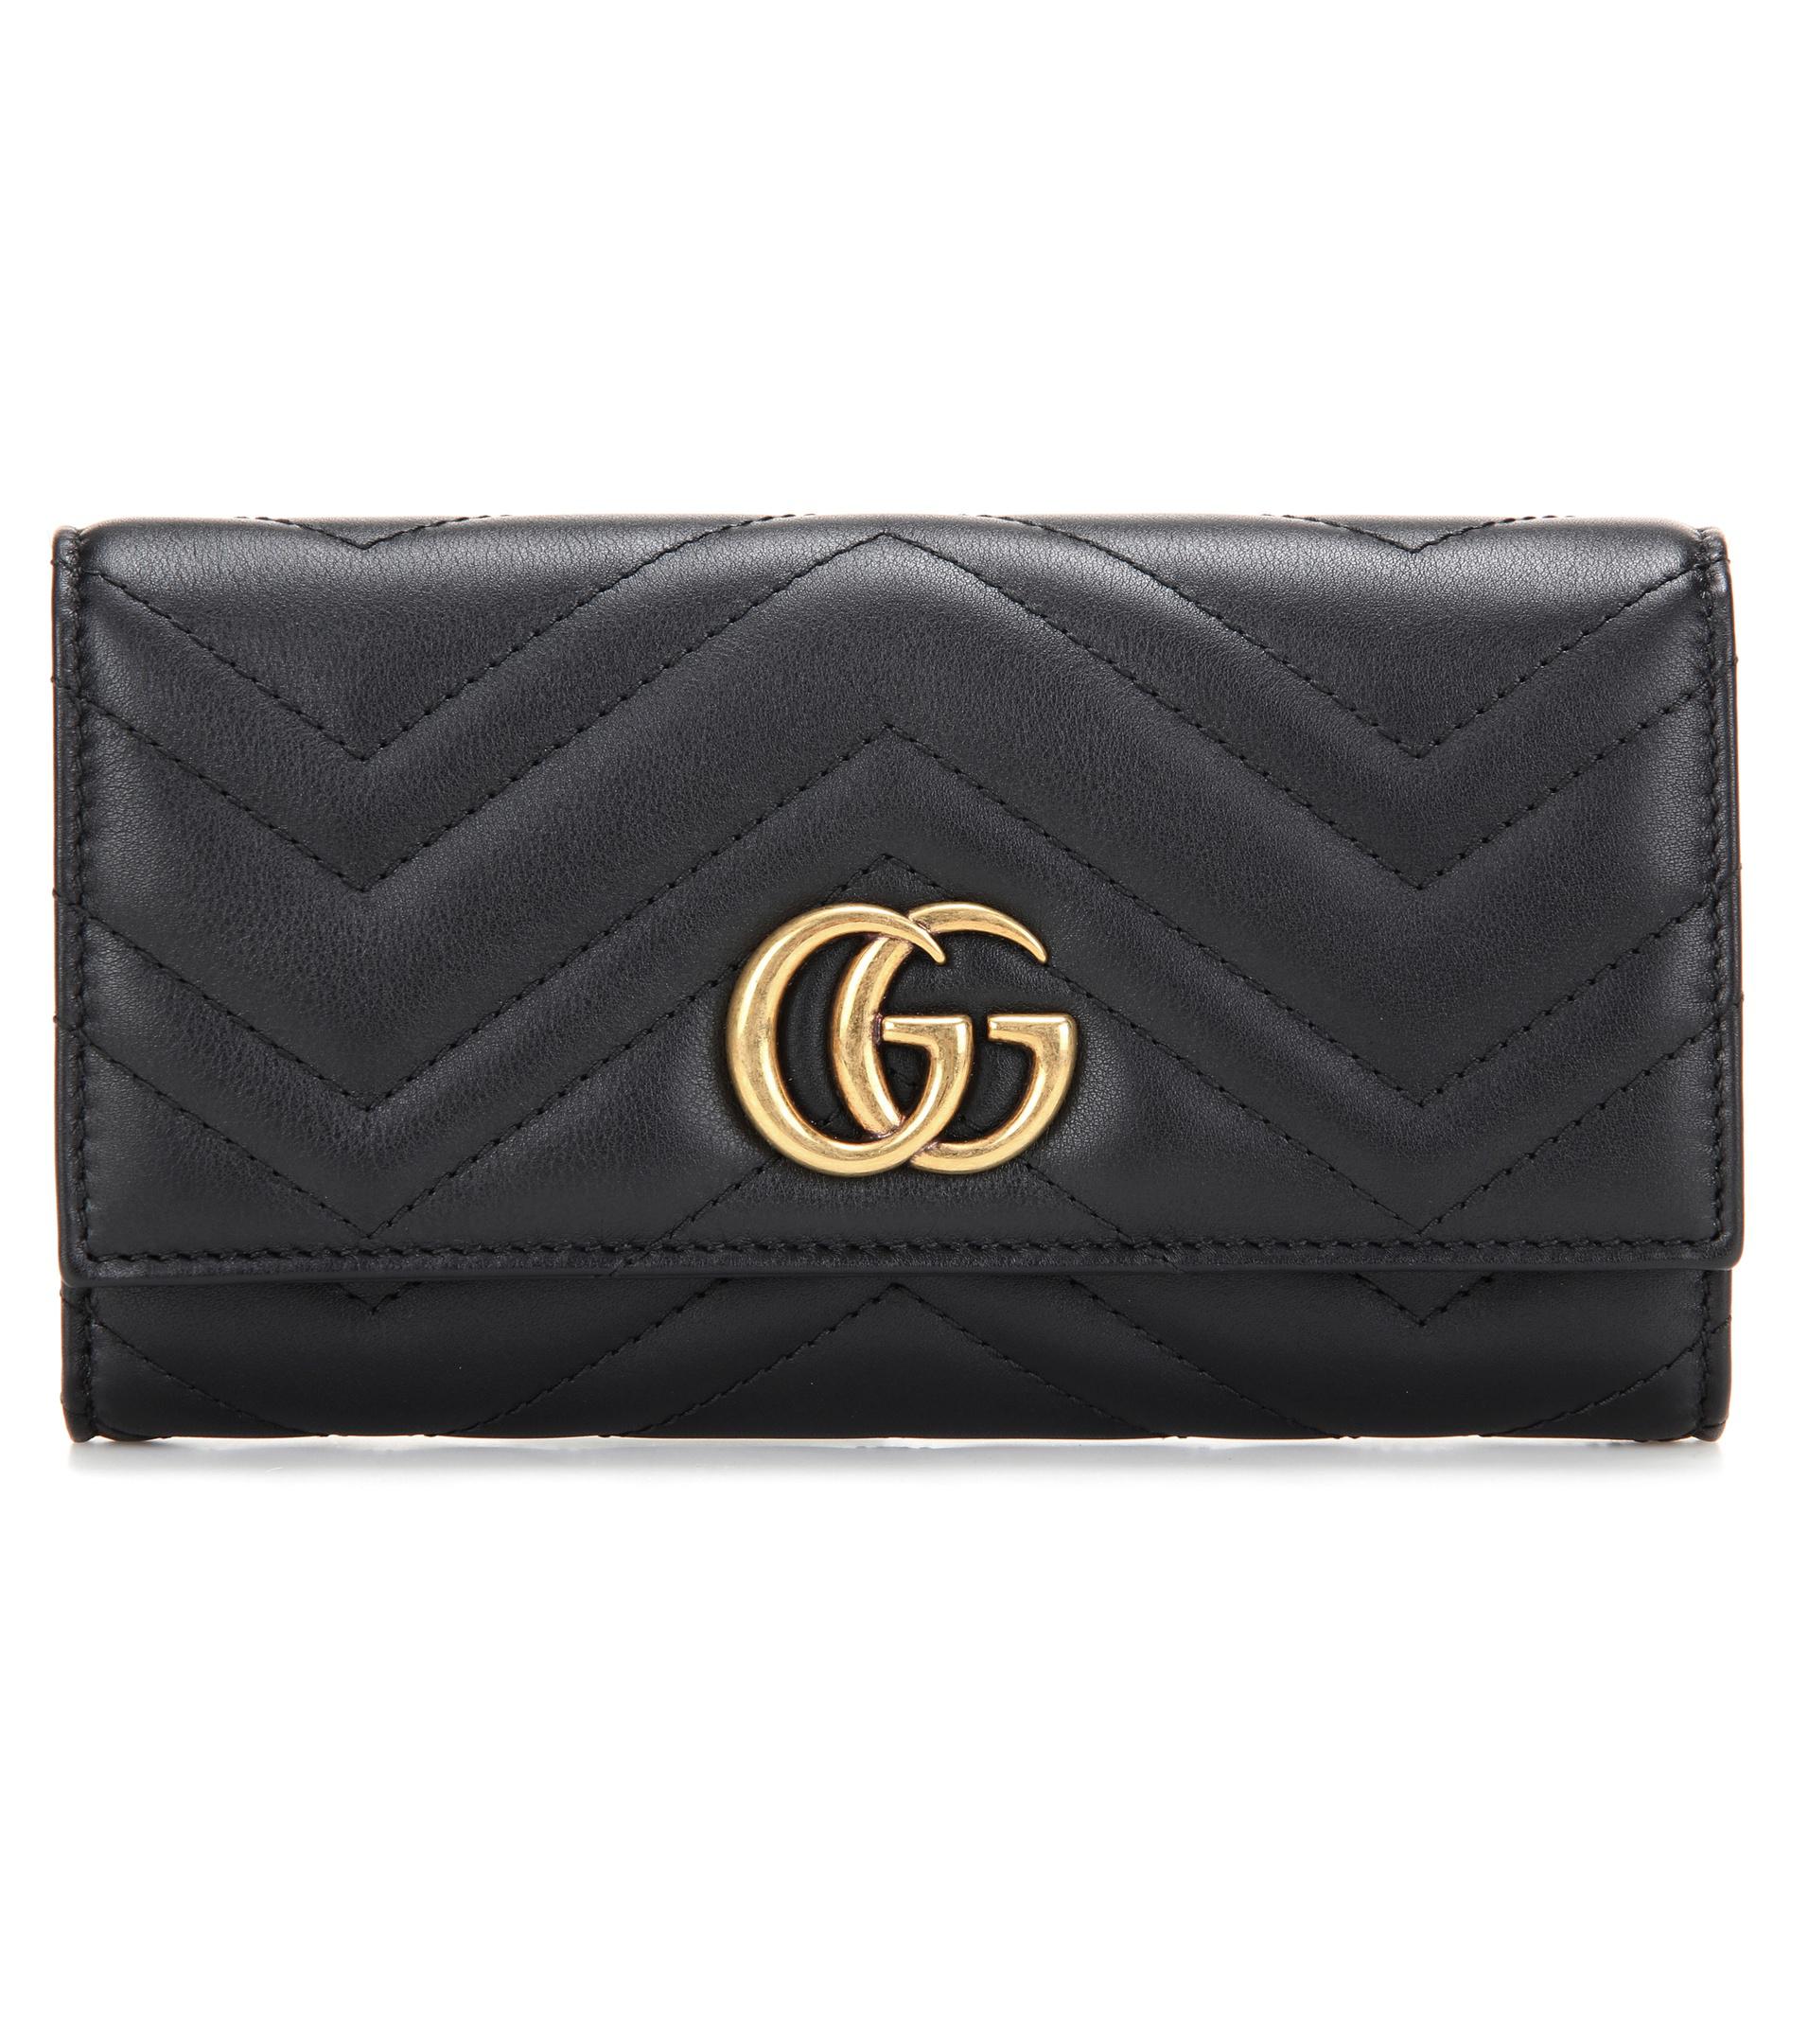 Gucci Leather GG Marmont Continental Wallet in Nero (Black) - Lyst